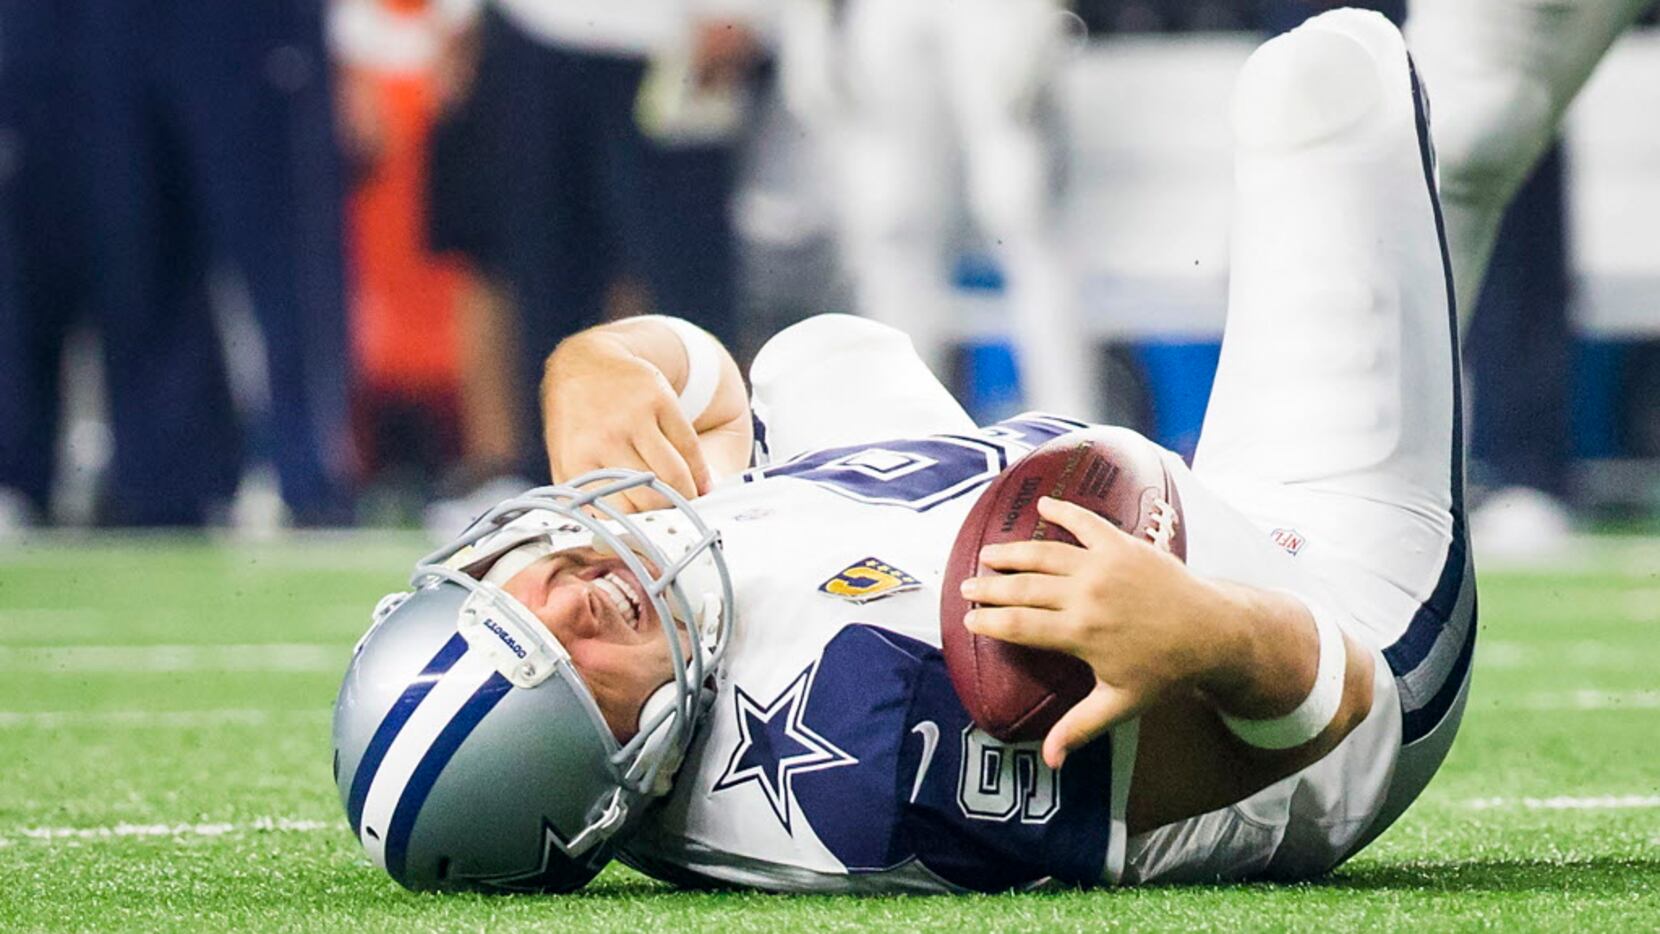 Dallas Cowboys quarterback Tony Romo (9) grimaces as he rests on the turf after being sacked...